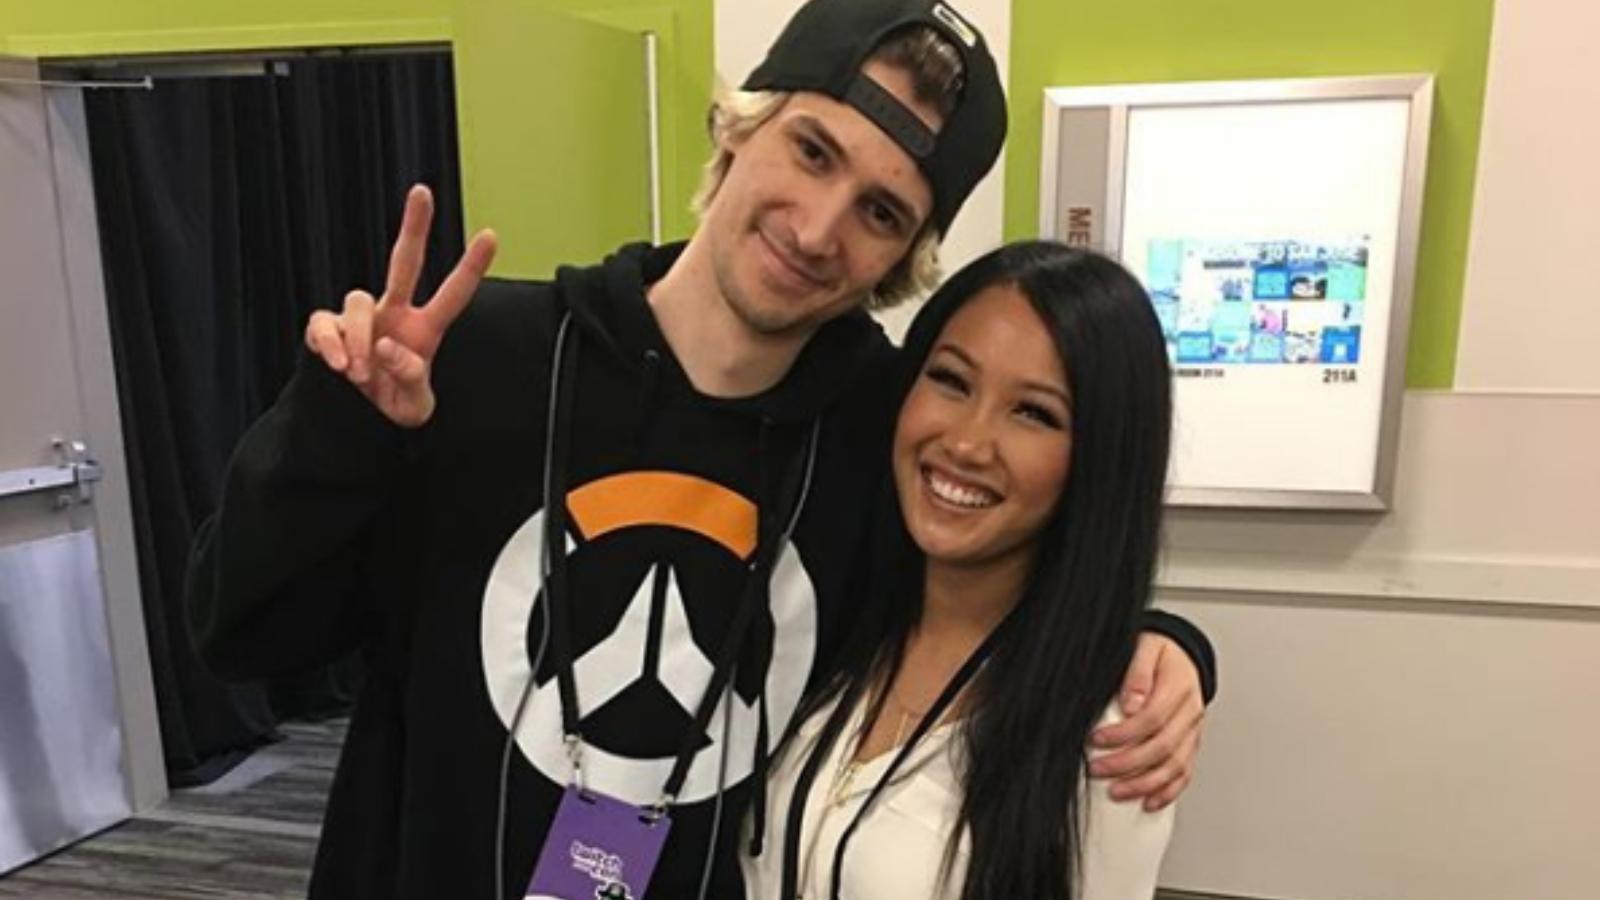 xqc with fran at twitchcon